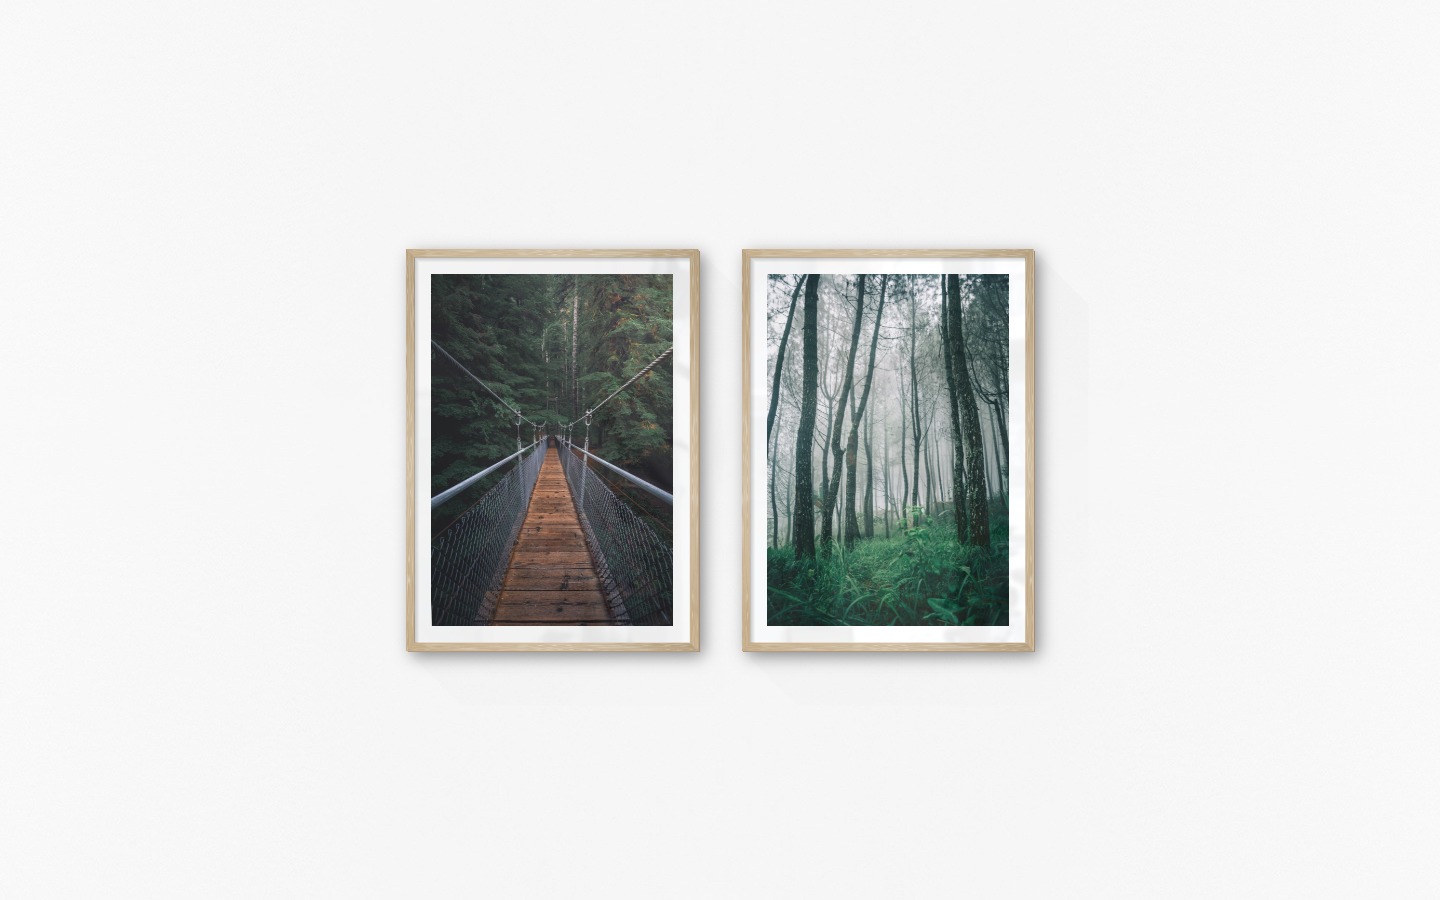 Gallery wall with picture frames in wood in sizes 50x70 with prints "Bridge in the woods" and "Tall trees"